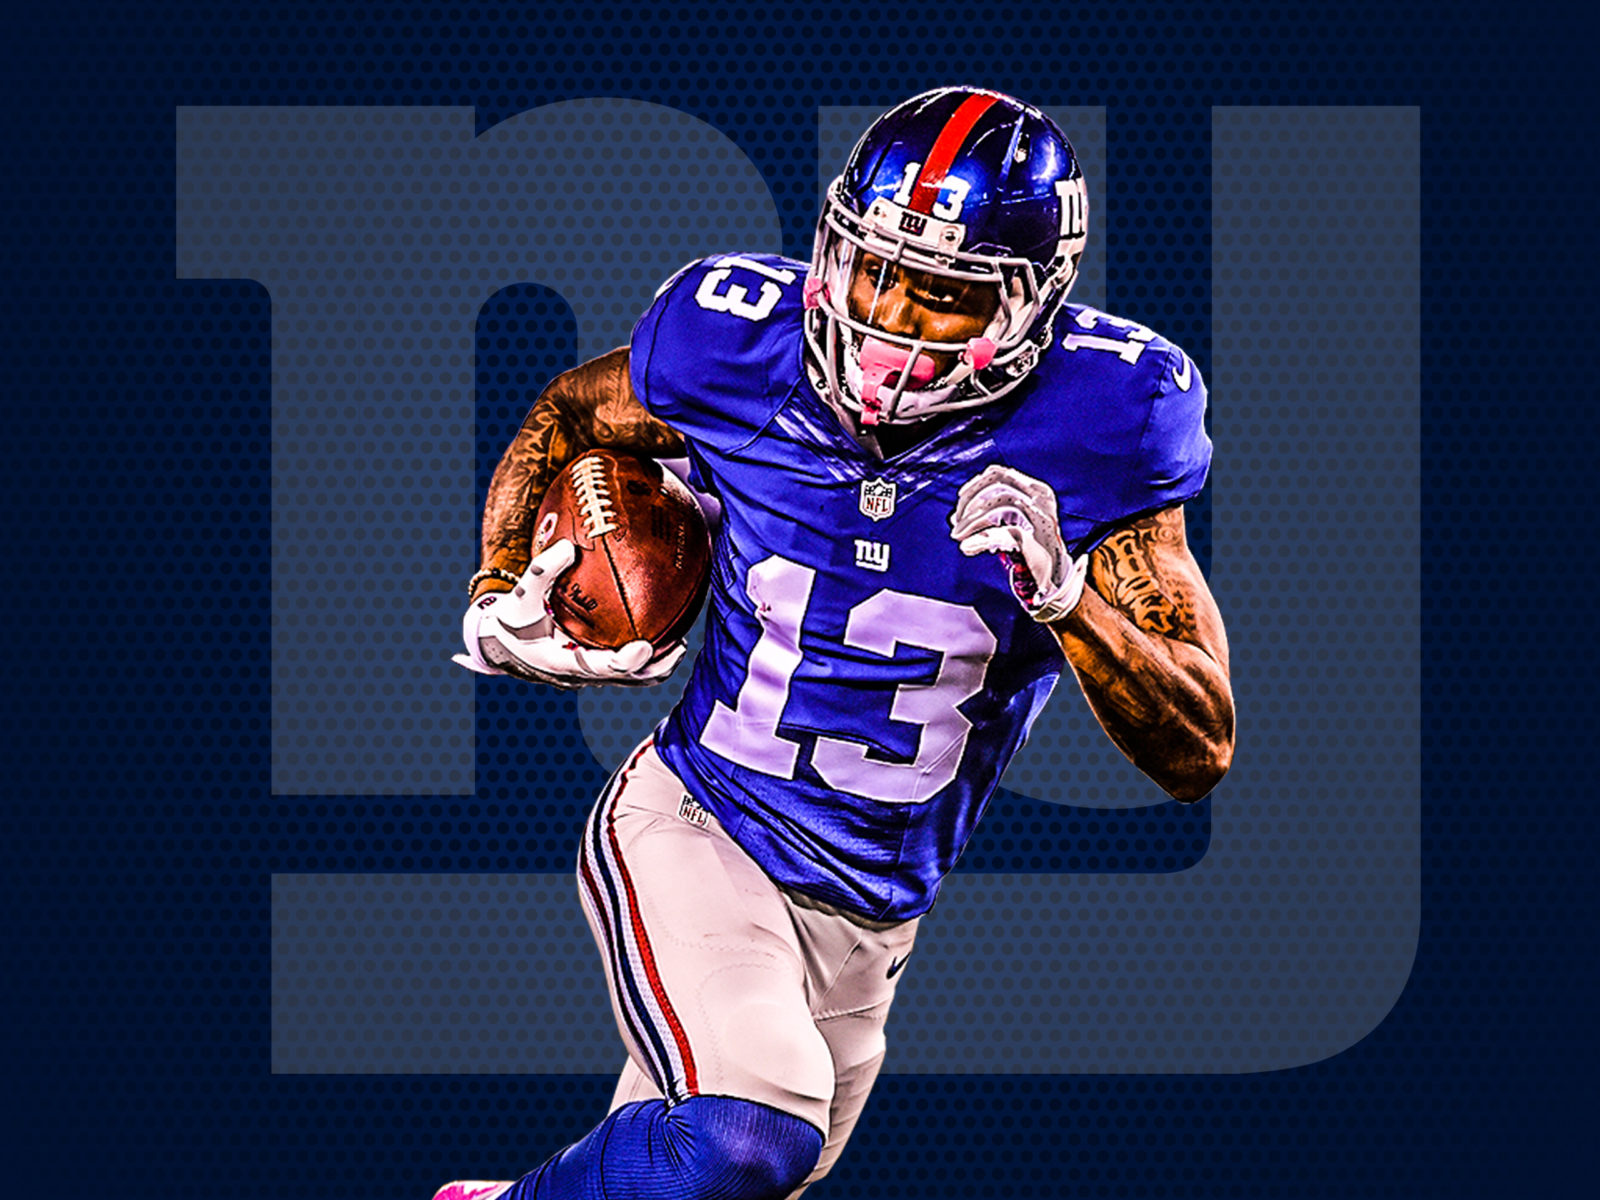 Odell Beckham Jr Real 3d Wallpaper – HD Wallpapers Backgrounds Desktop, iphone & Android Free Download